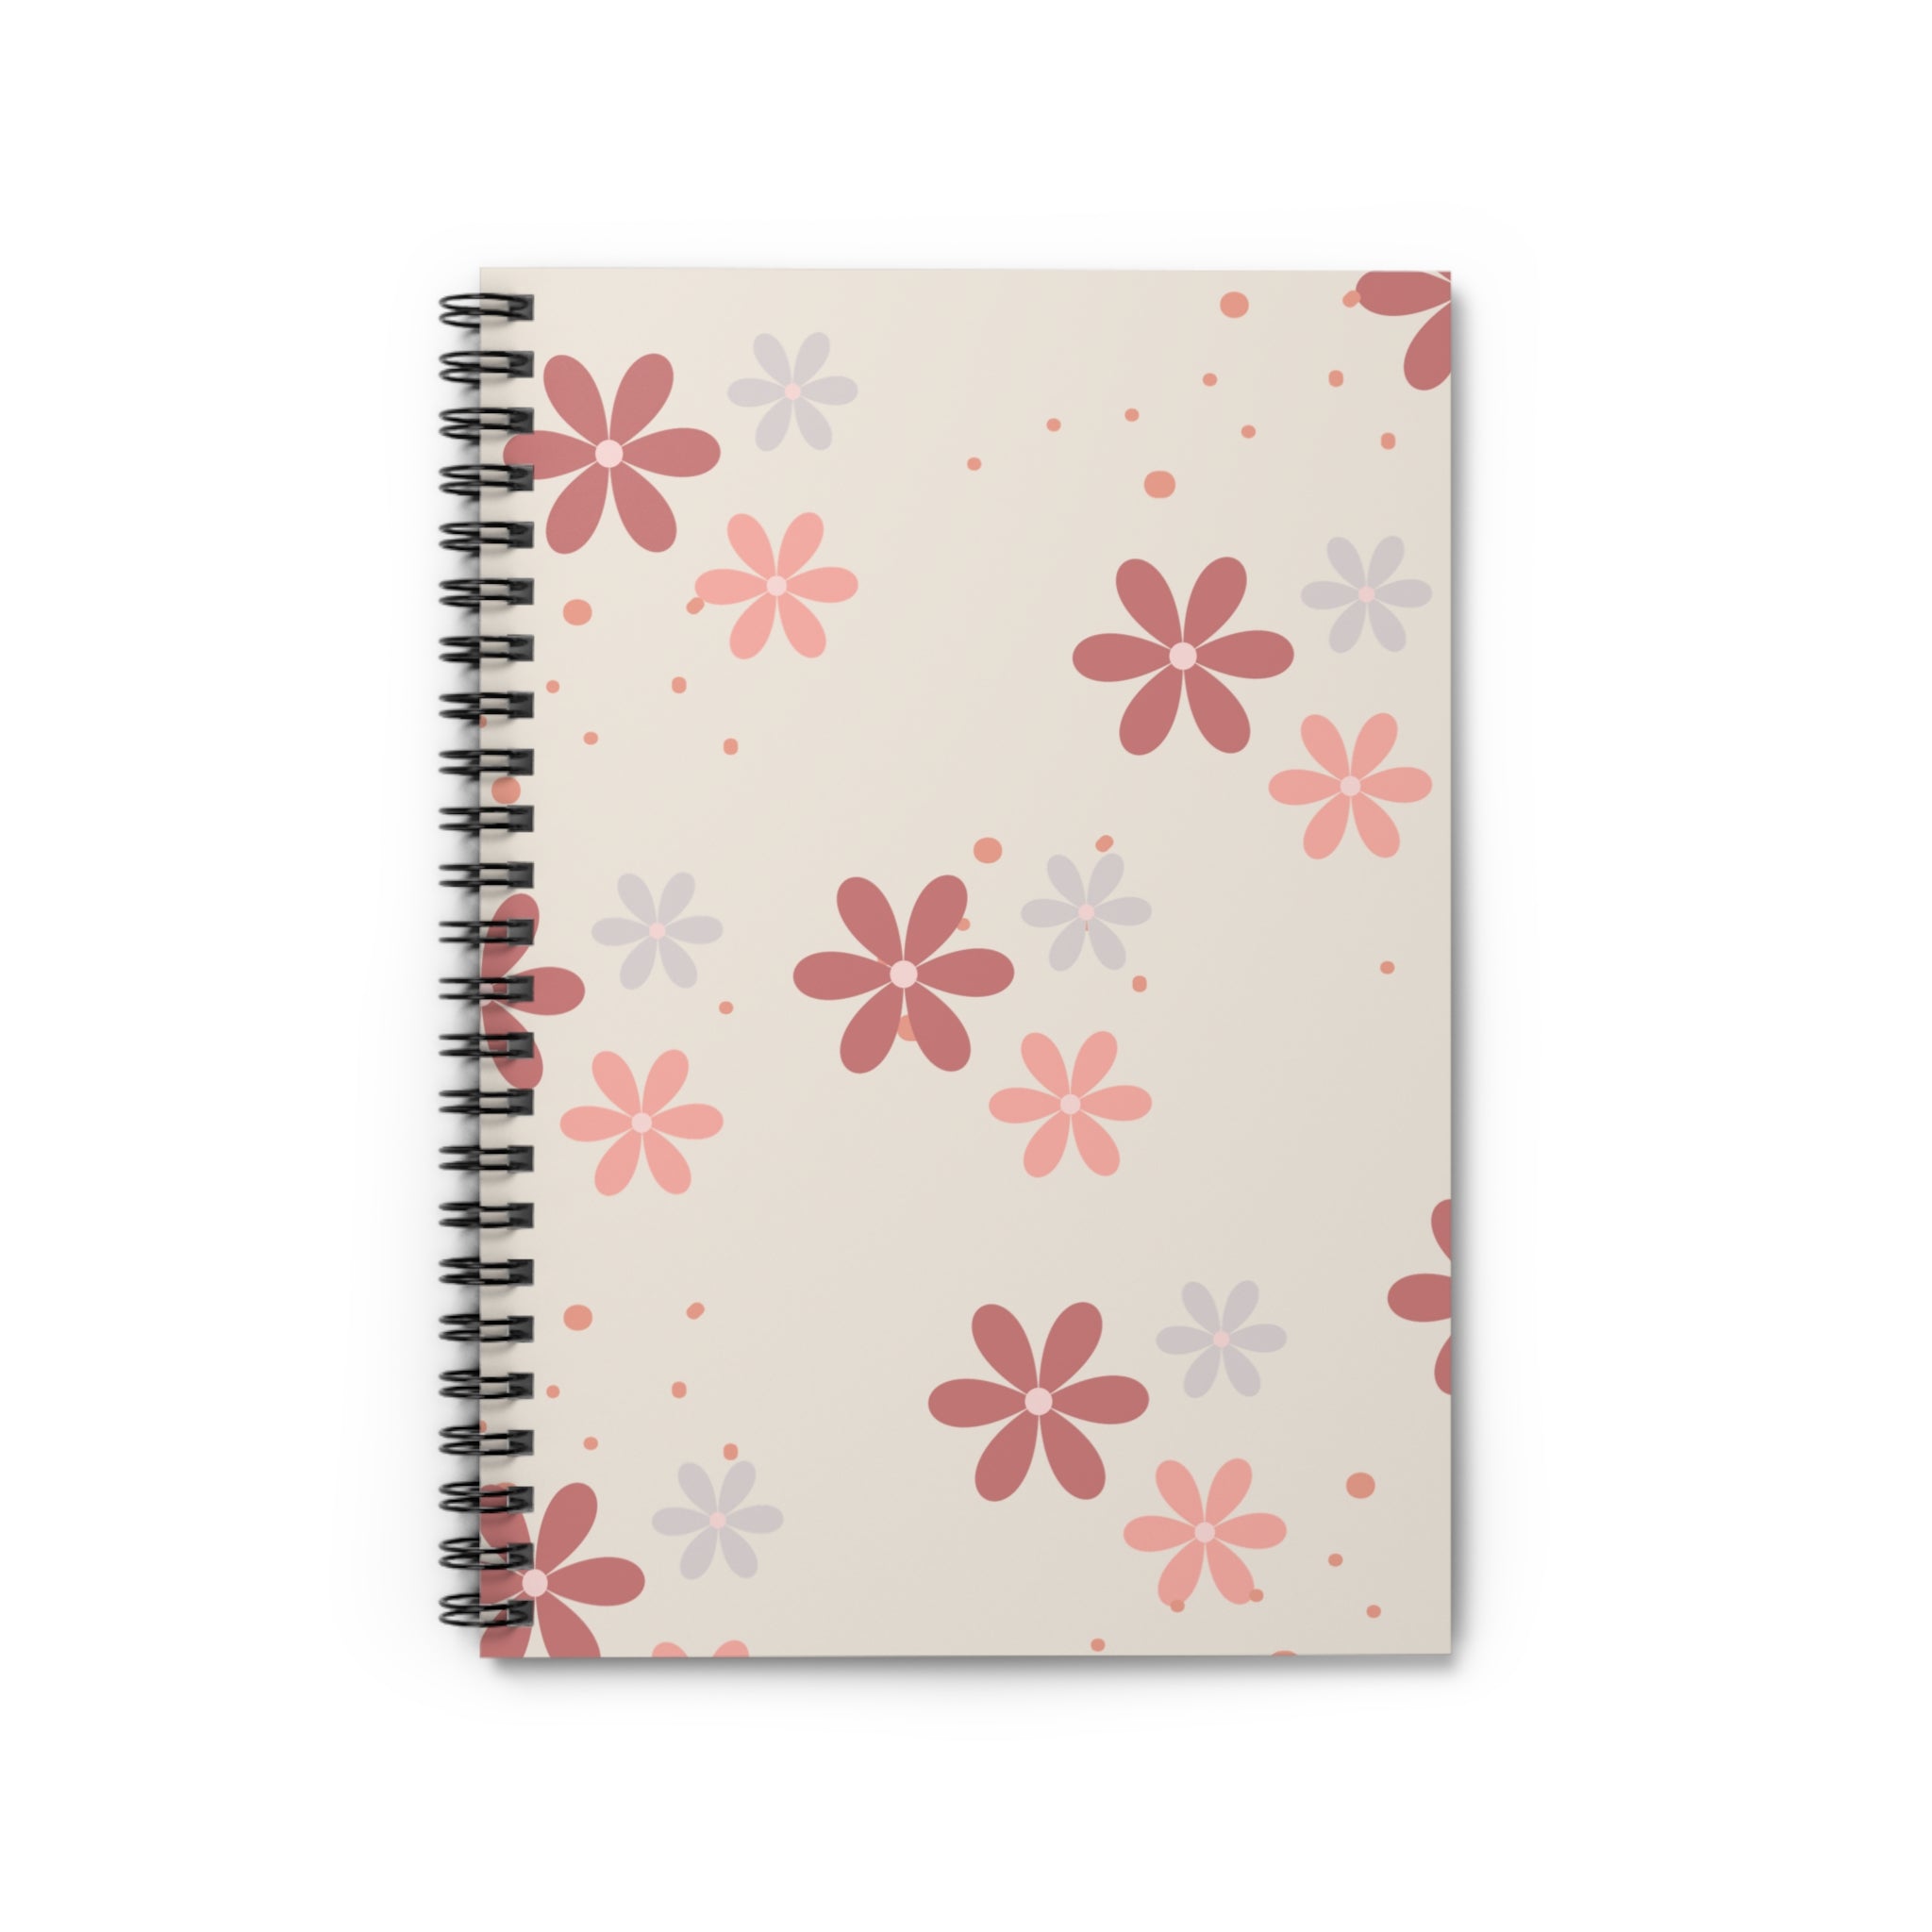 Pink Daisy Spiral Notebook - Ruled Line